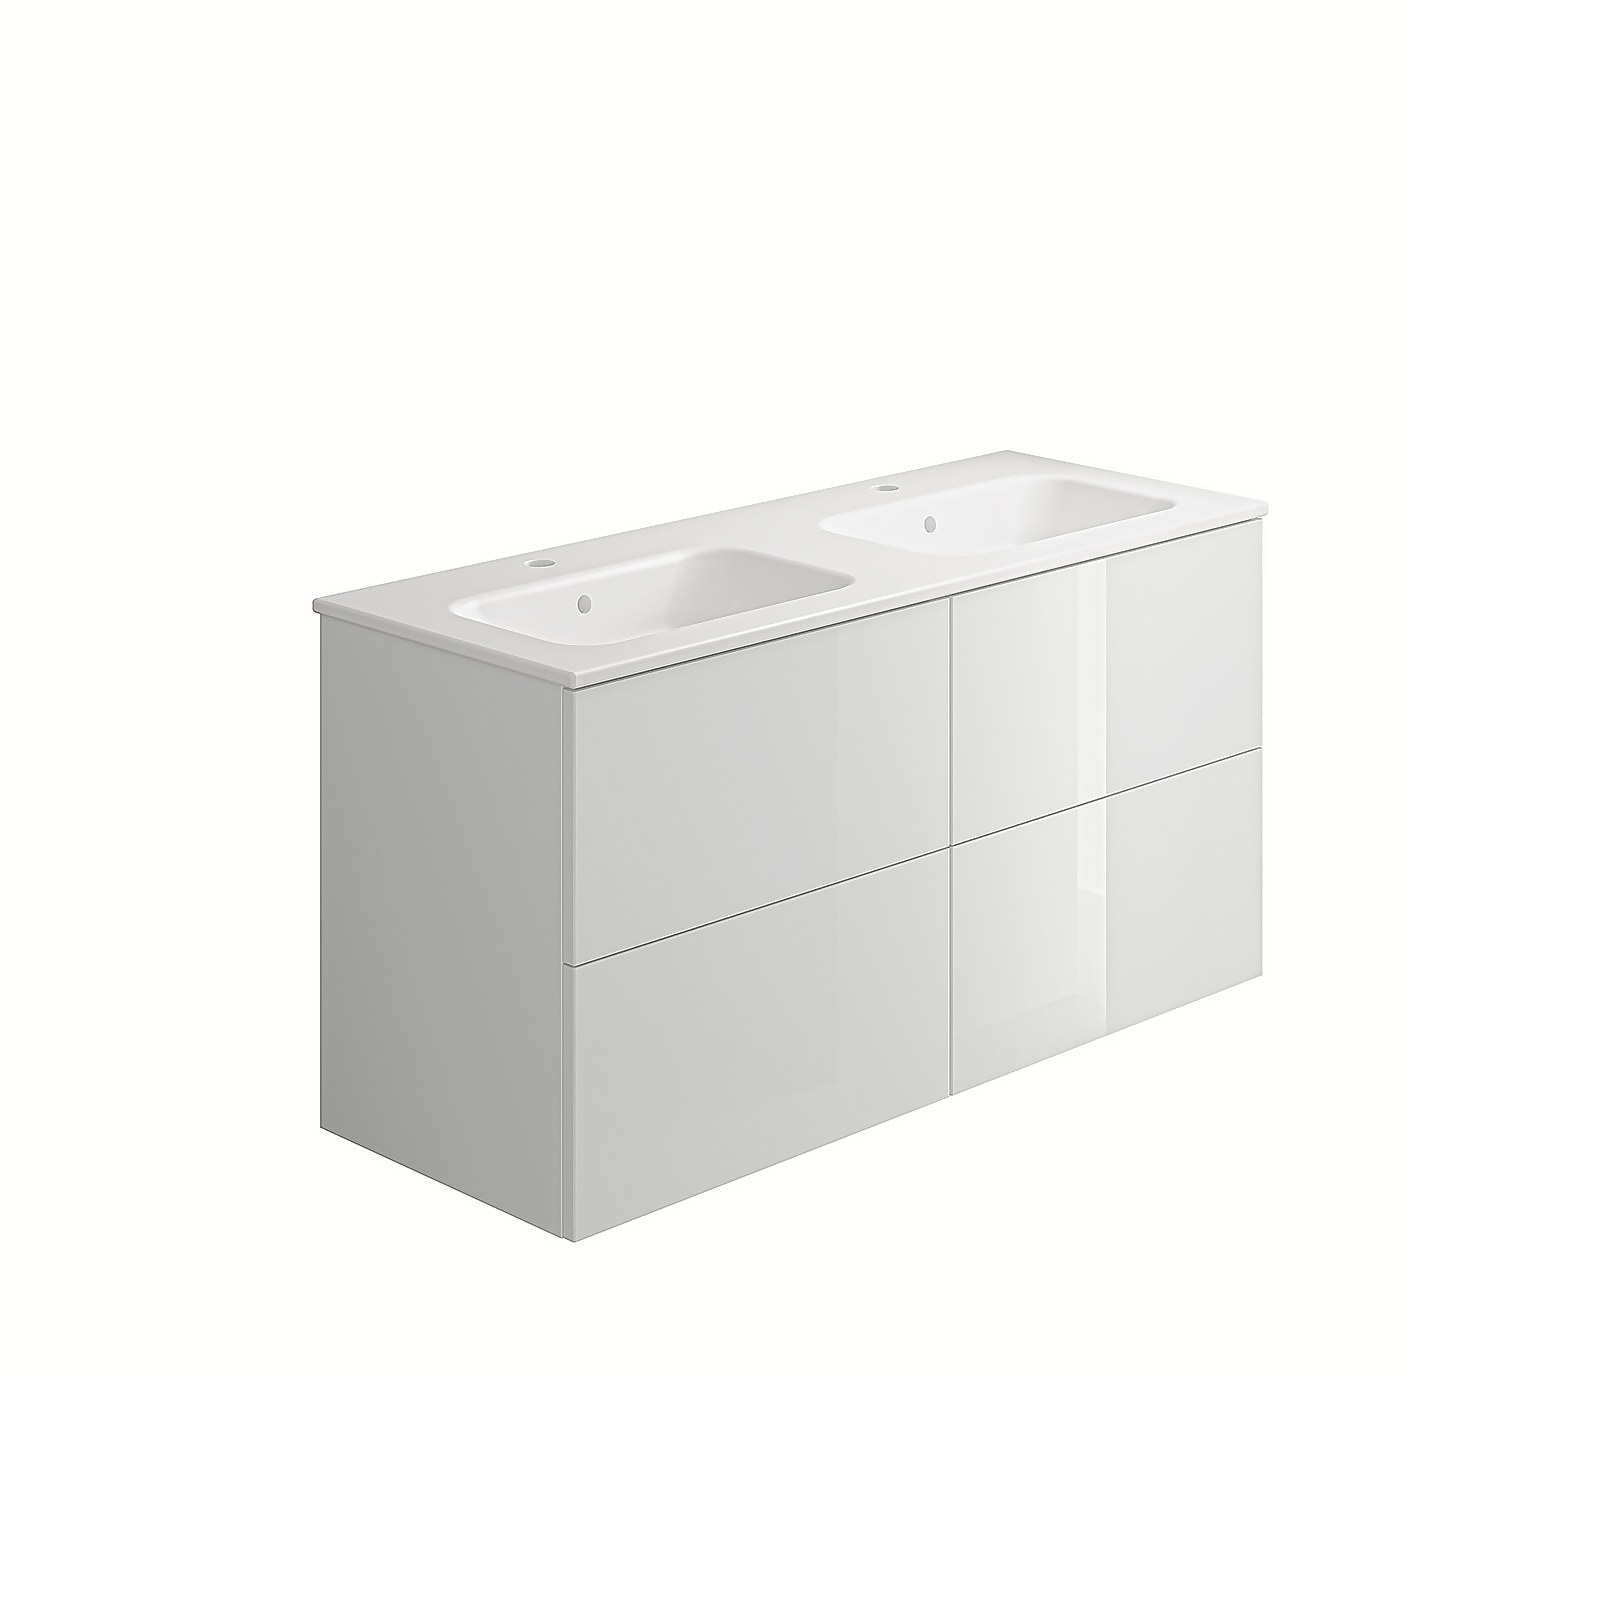 Photo of House Beautiful Ele-ment-s- 1200mm Gloss White Wall Mounted Vanity With Basin